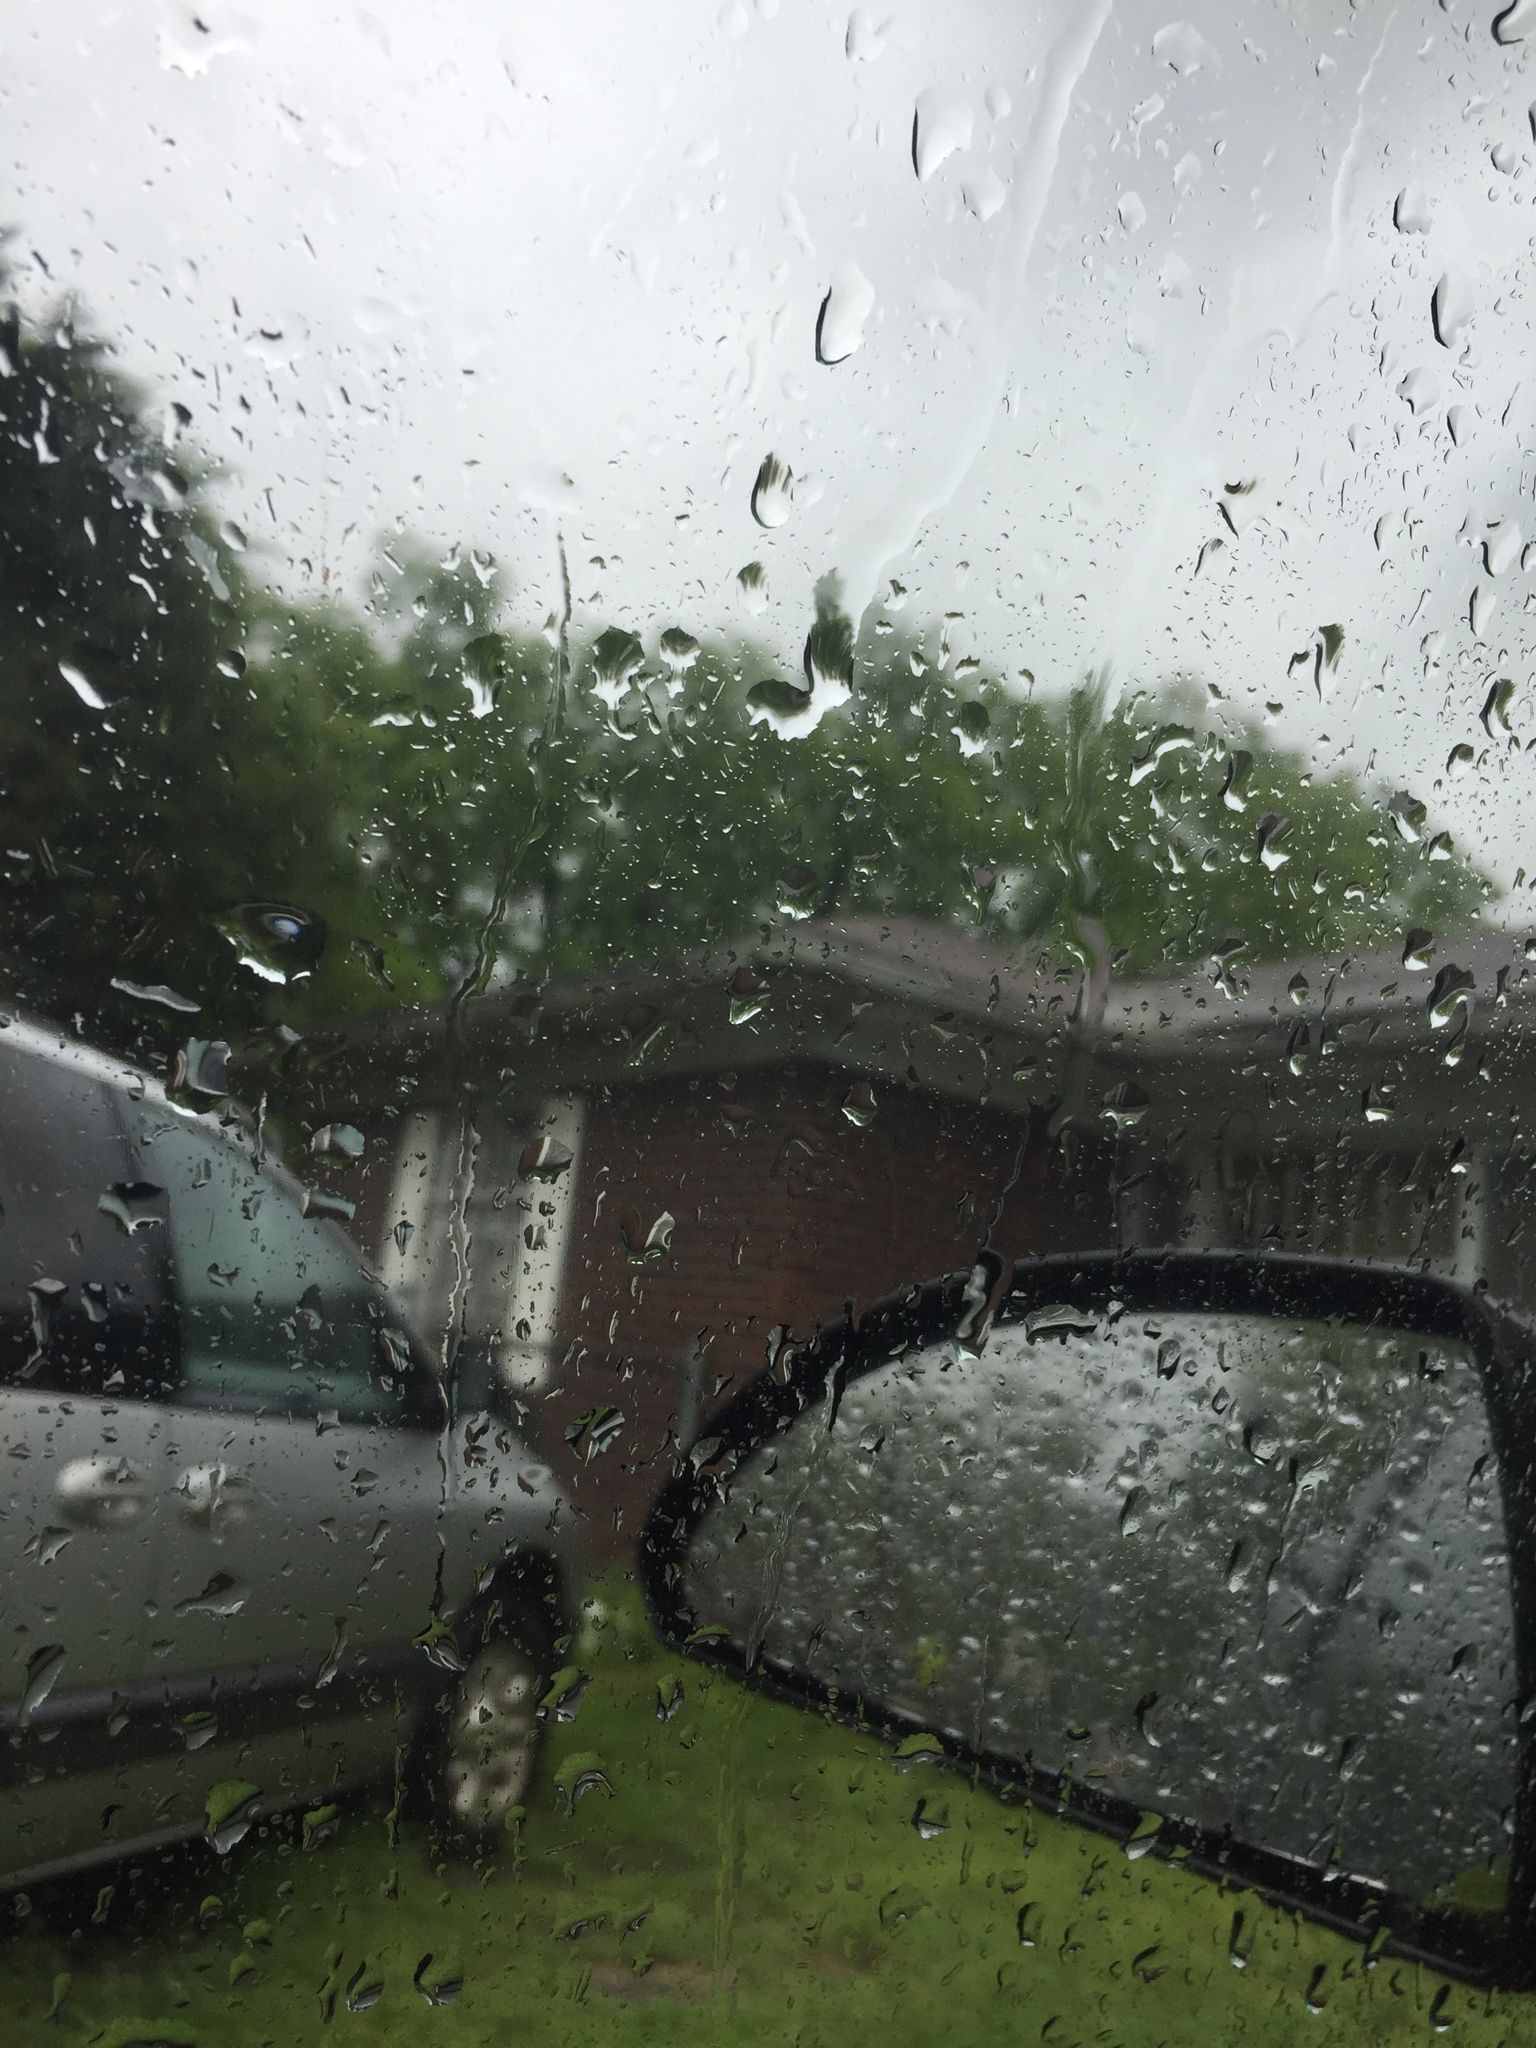 A car is parked in a driveway with rain falling on the window. - Rain